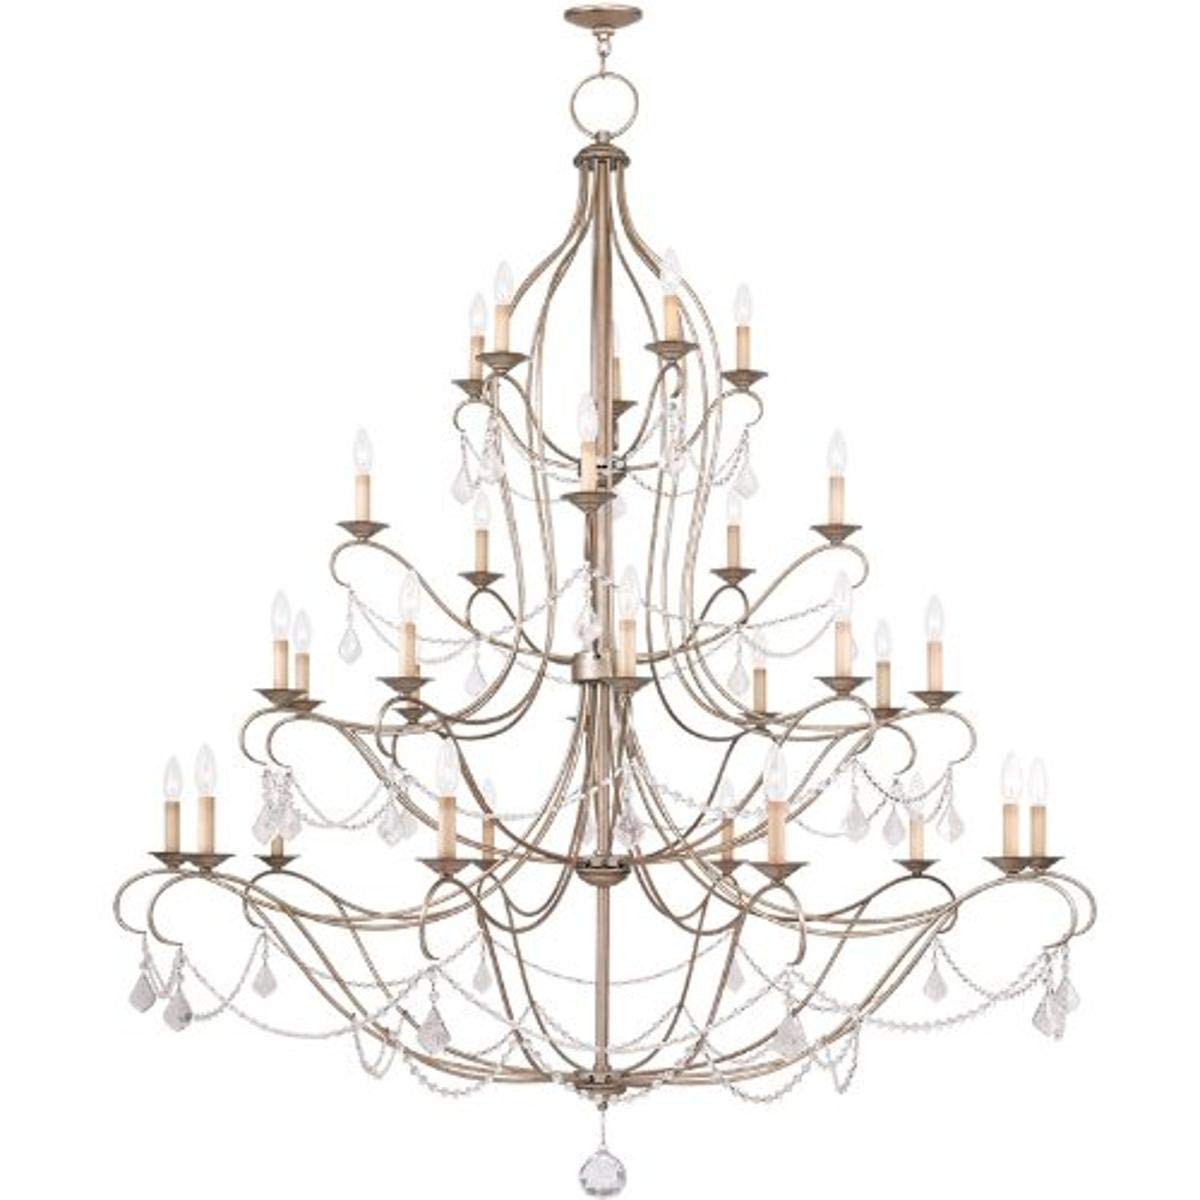 Livex Lighting 6459-73 Chesterfield 30 Light Chandelier, Hand Painted Antique Silver Leaf